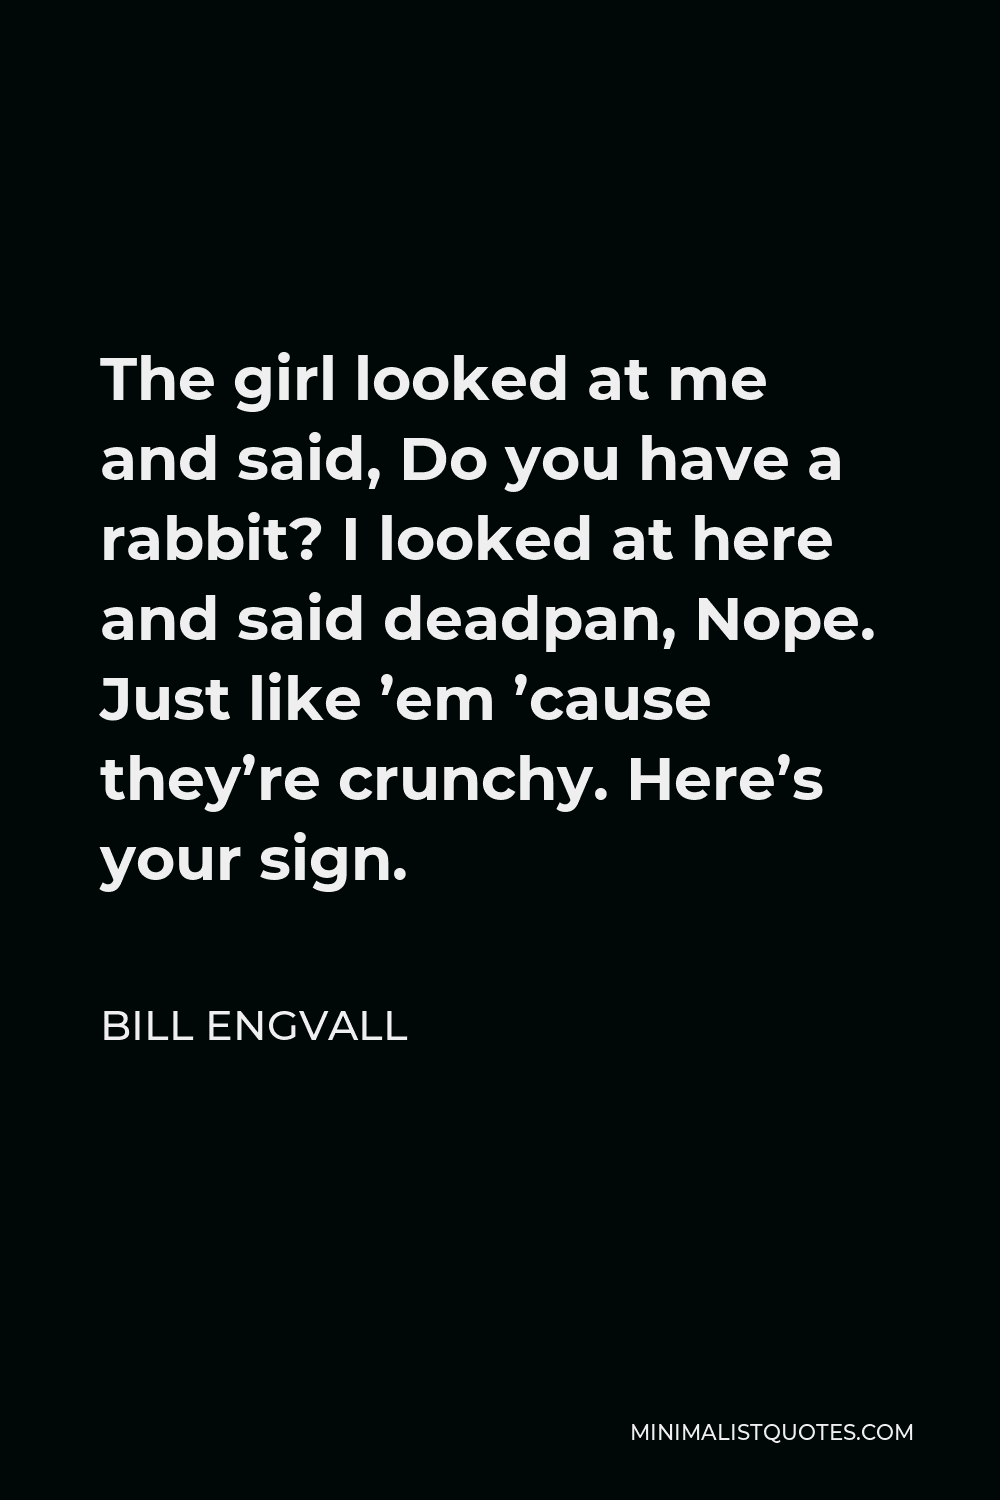 Bill Engvall Quote - The girl looked at me and said, Do you have a rabbit? I looked at here and said deadpan, Nope. Just like ’em ’cause they’re crunchy. Here’s your sign.